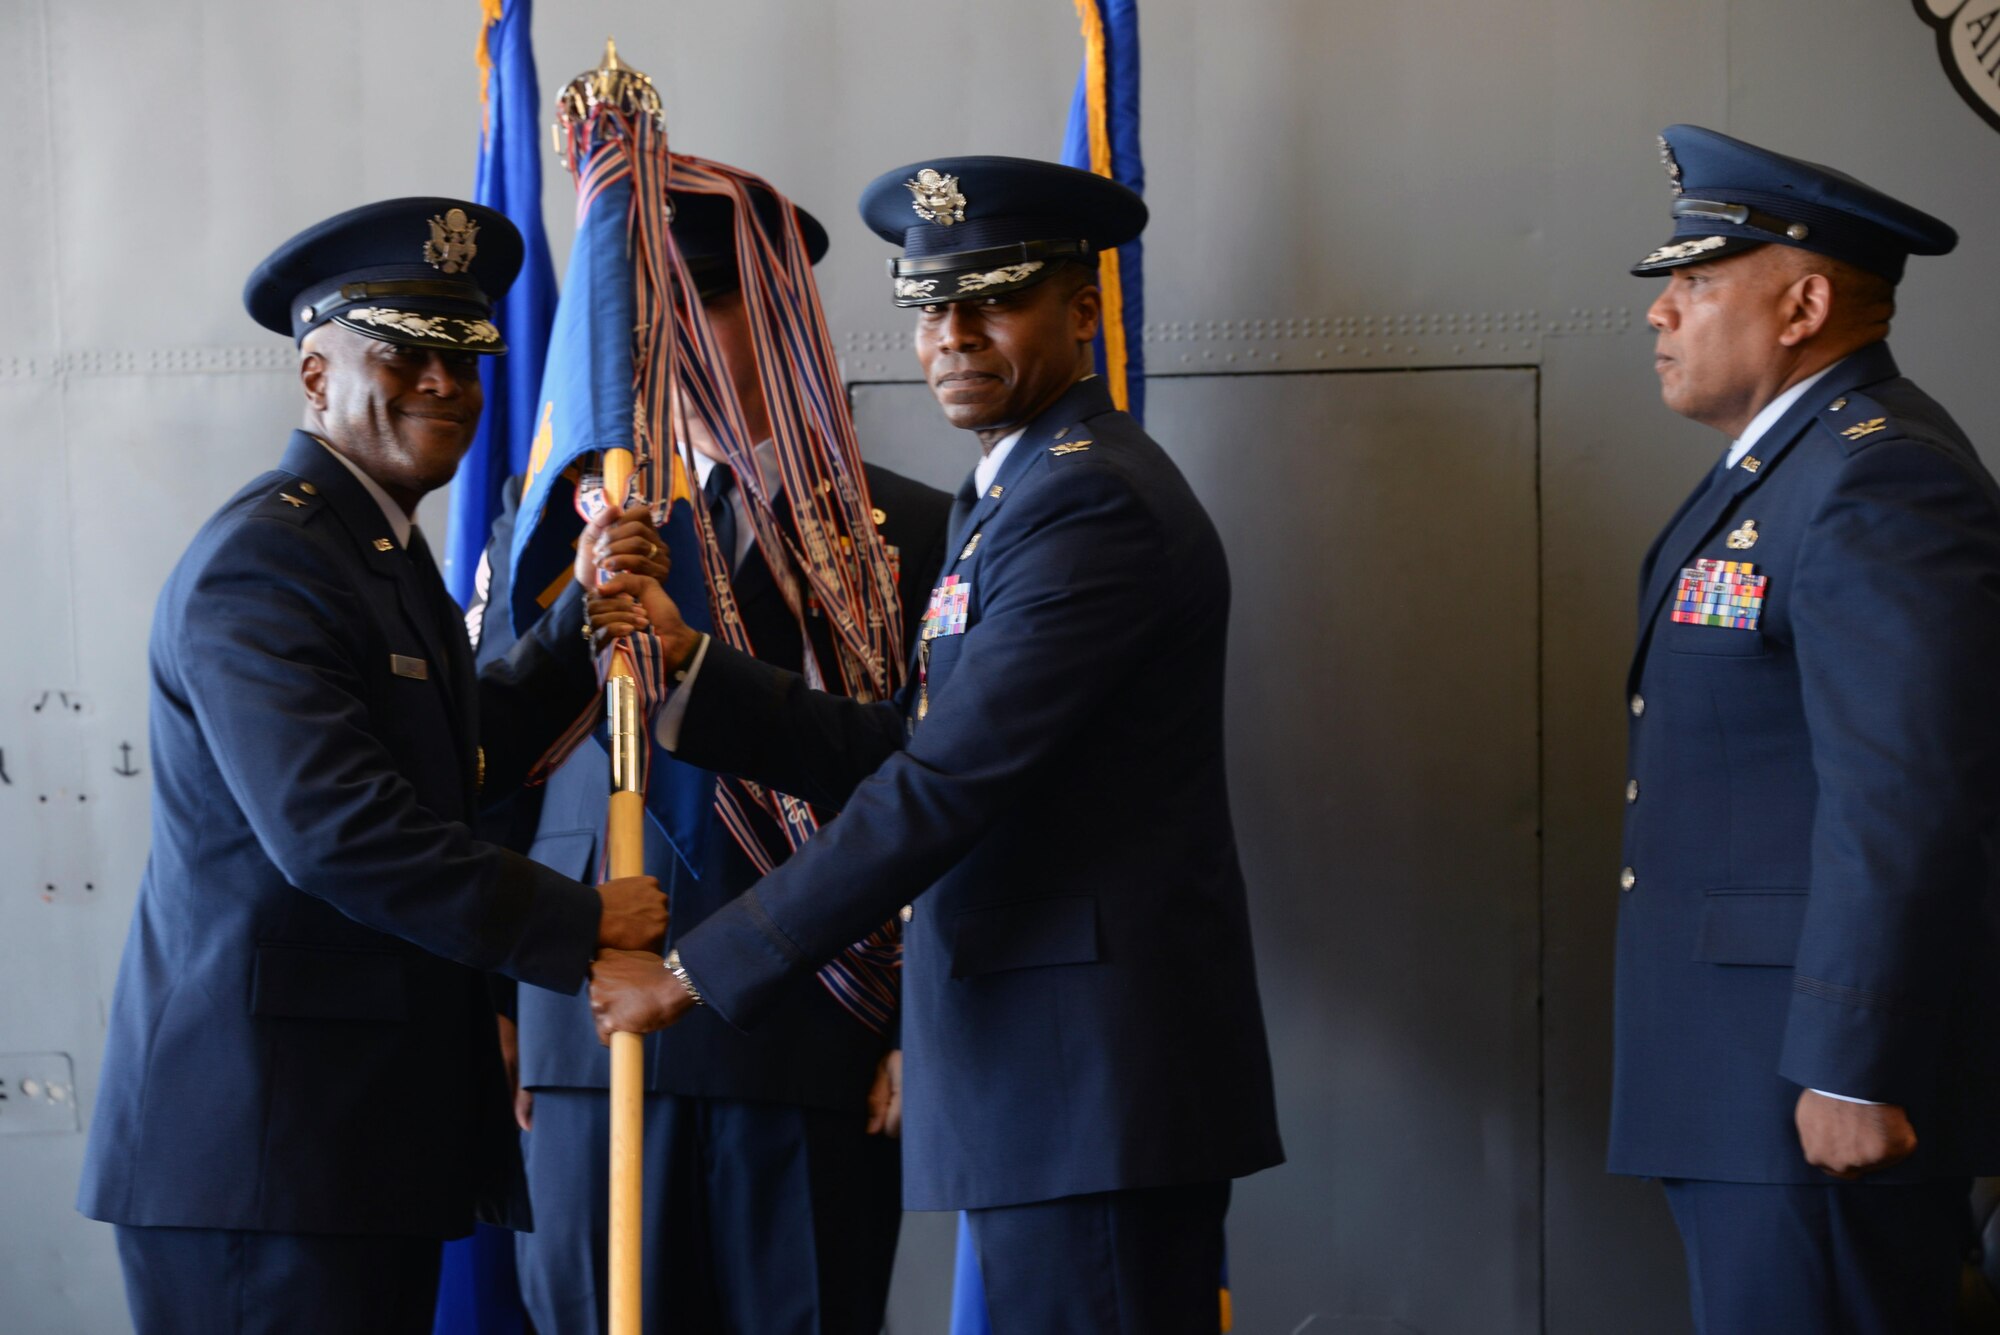 Col. Jason Childs hands off the guidon to Brig. Gen. Ronald E. Jolly Sr. during the 982nd Change of Command ceremony July 7, 2017. Col. Childs passed on command of the 982nd TRG to Col. Anthony Puente. (U.S. Air Force photo by Senior Airman Robert L. McIlrath)